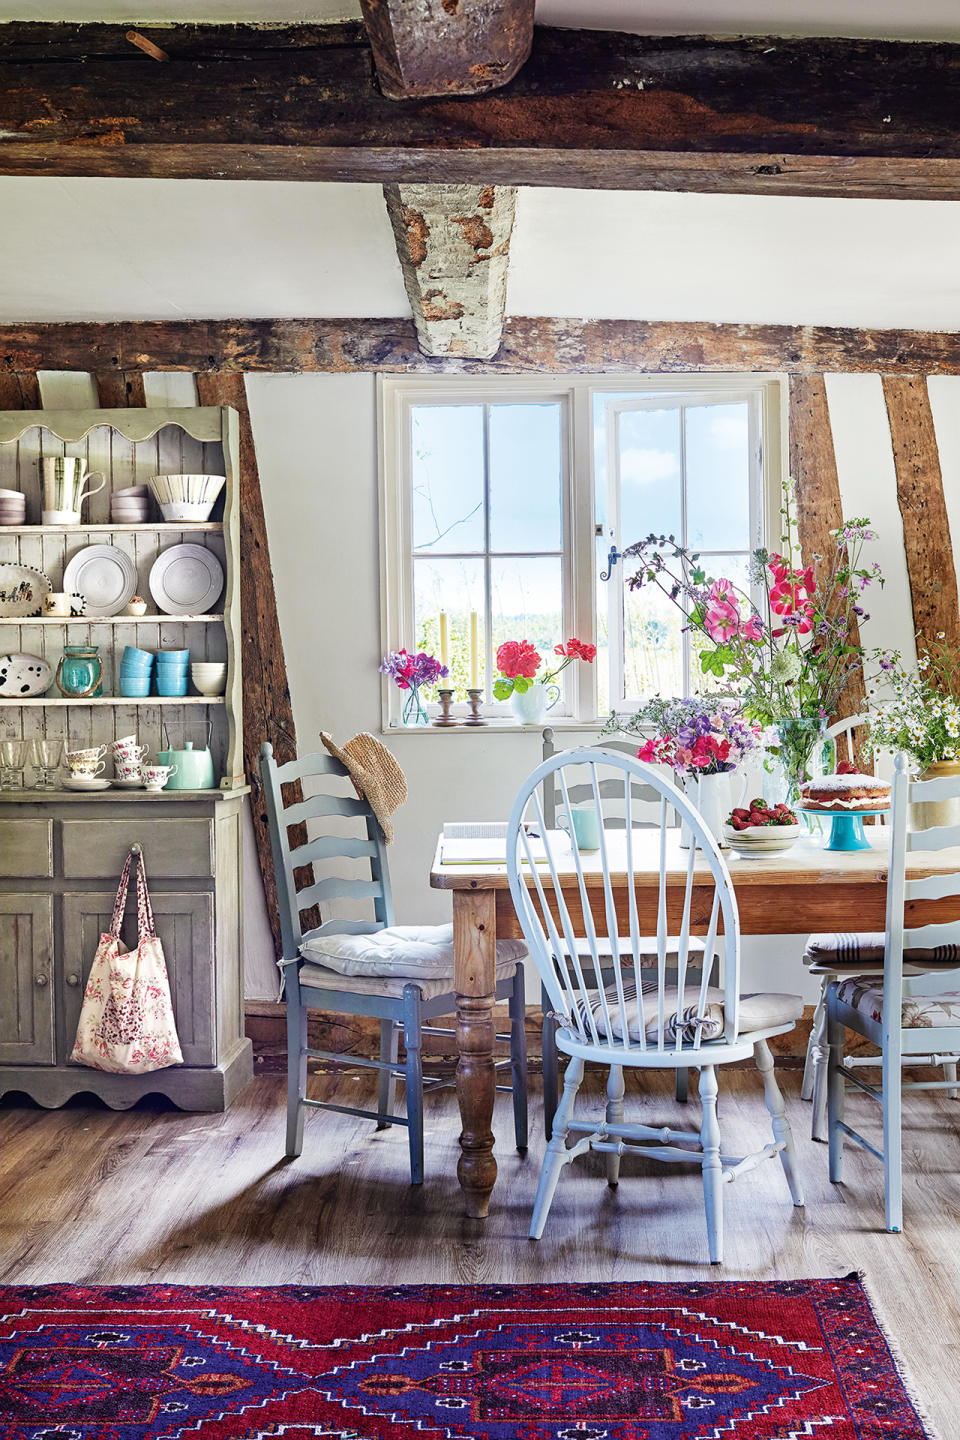 <p> 'Where once kitchens were purely practical and designed to be functional, now we are looking to create lived-in looks for them that are more a reflection of the decor in the rest of our homes, particularly our living spaces,' says <em>Homes & Gardens</em> Editor in Chief Lucy Searle. </p> <p> 'The easiest way to transform an existing kitchen is with textiles – rugs or runners that can withstand or disguise the odd splash or stain along a run of cabinetry or under a dining table, and pretty cushion pads on seats are a good place to start. Another way to introduce color and texture is by showing off decorative china and pottery on open shelving.' </p>